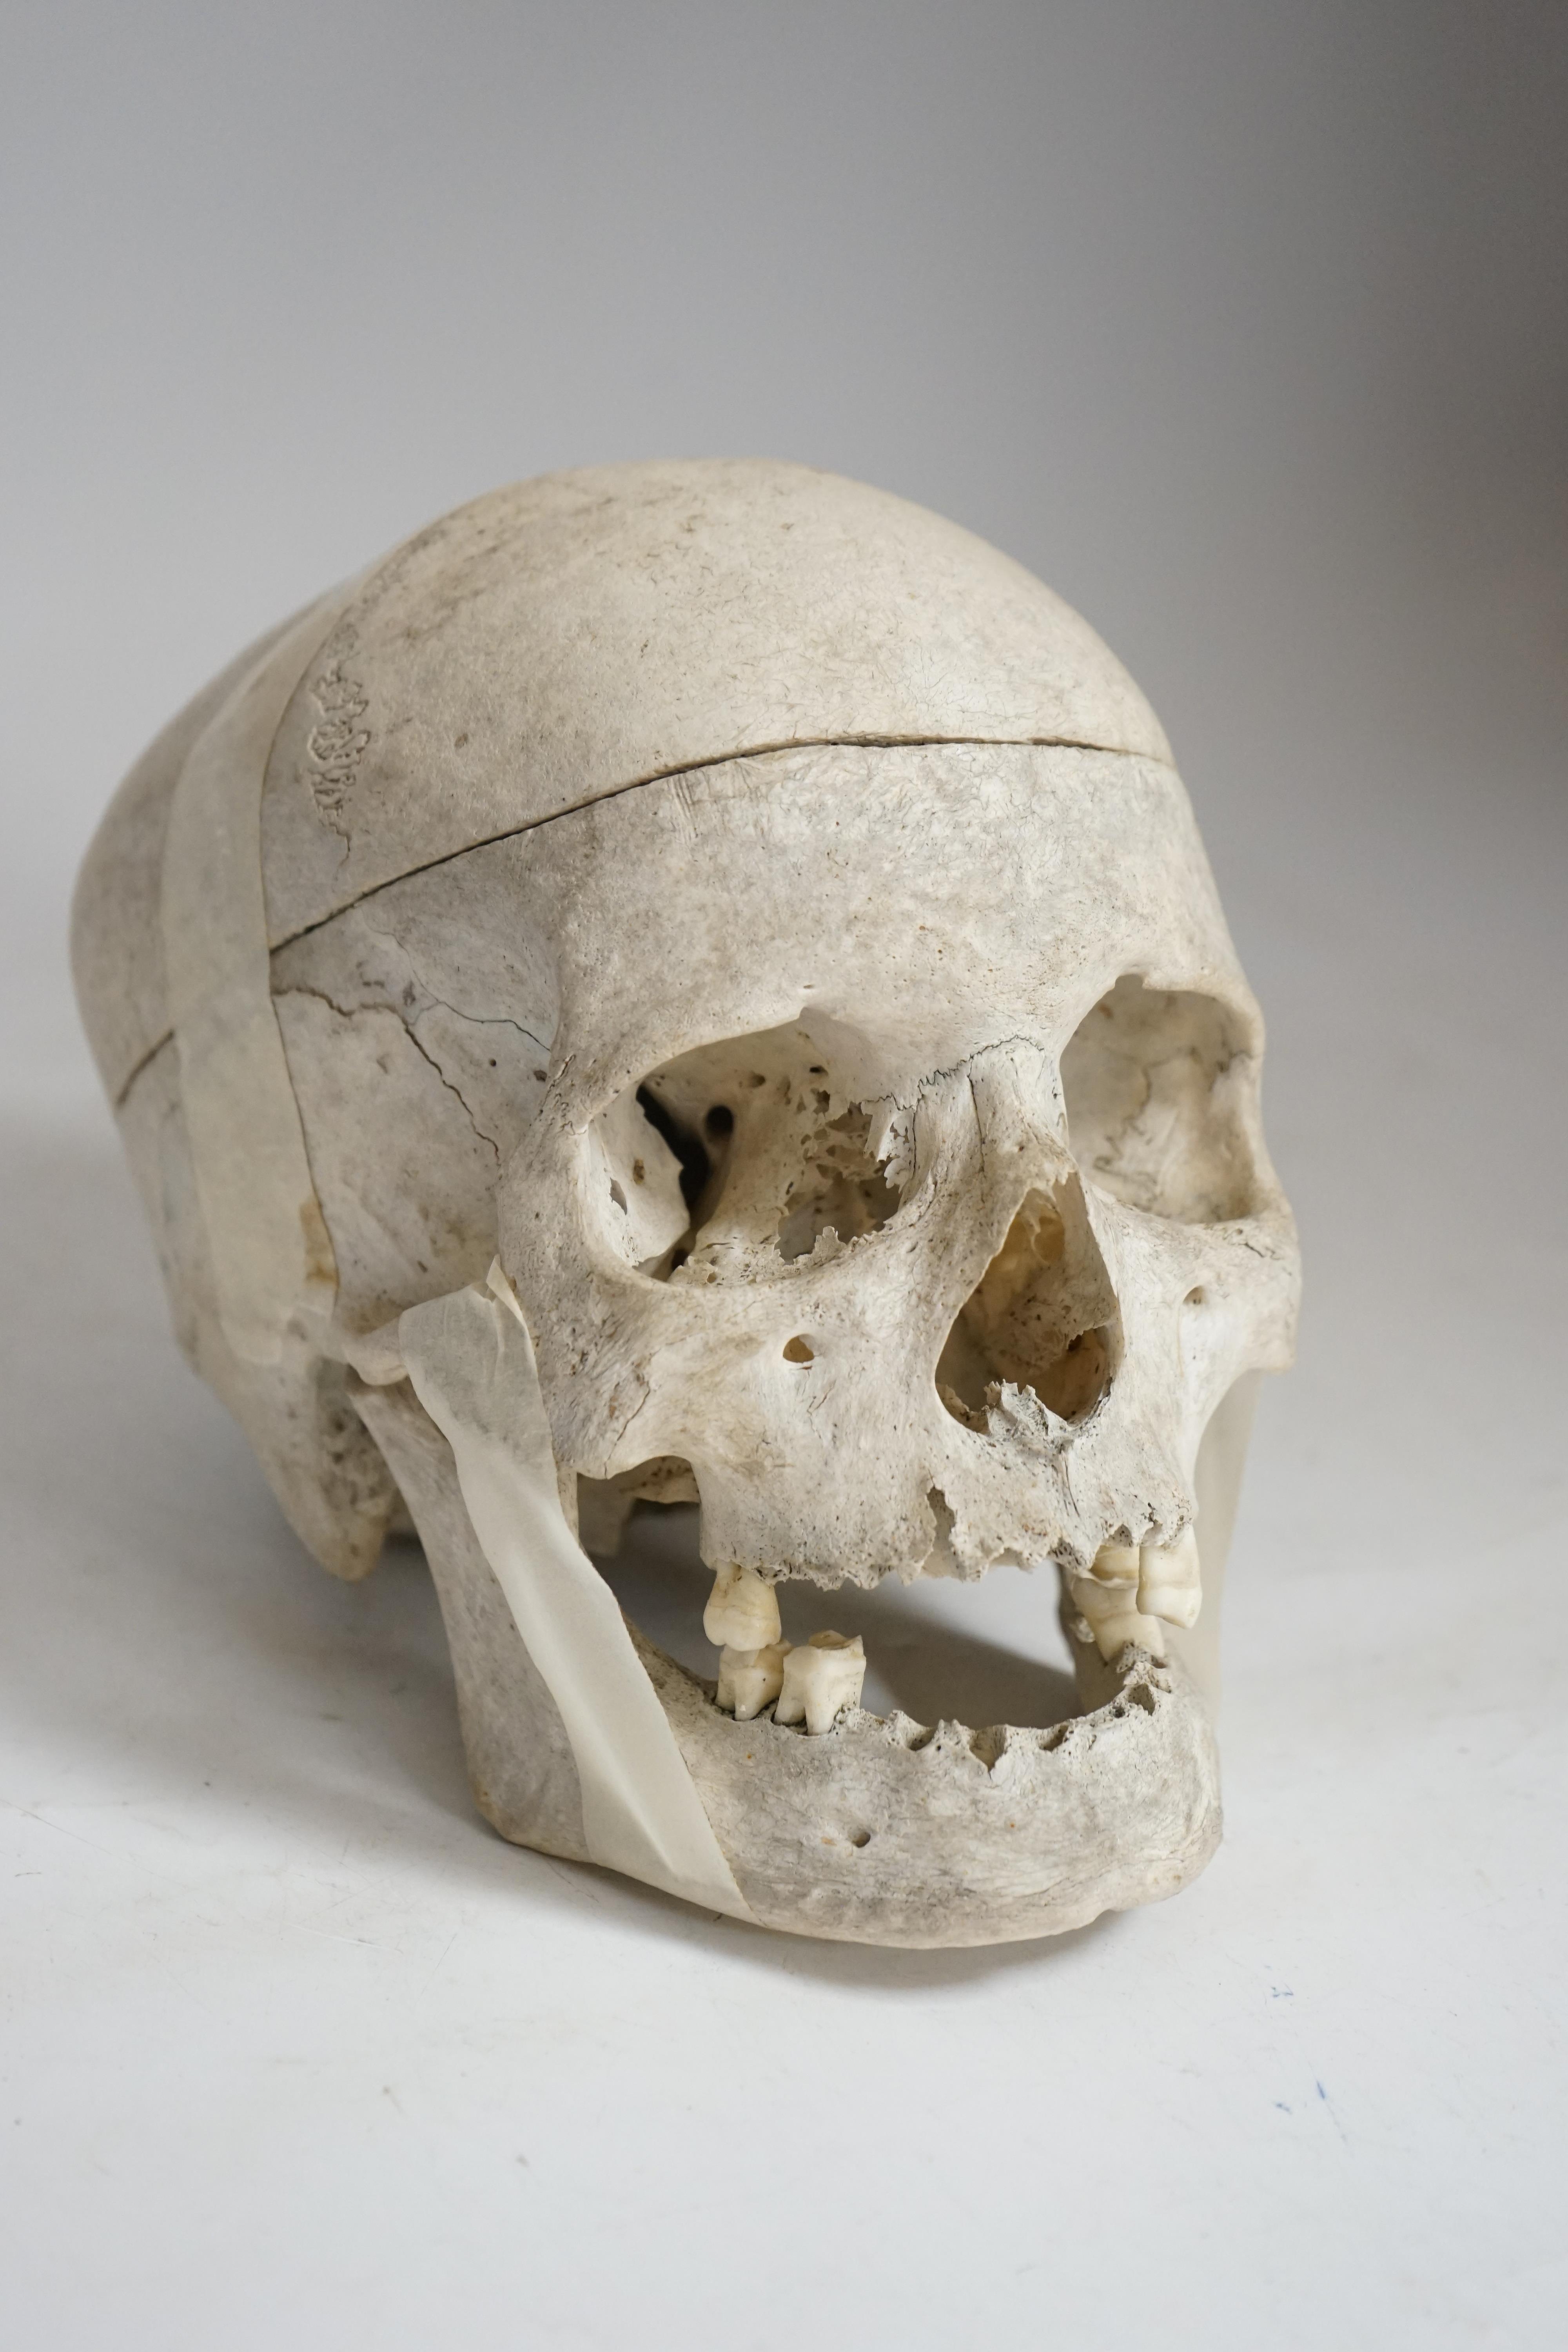 Human Anatomy - An Antique anatomical human skull, with lower jaw